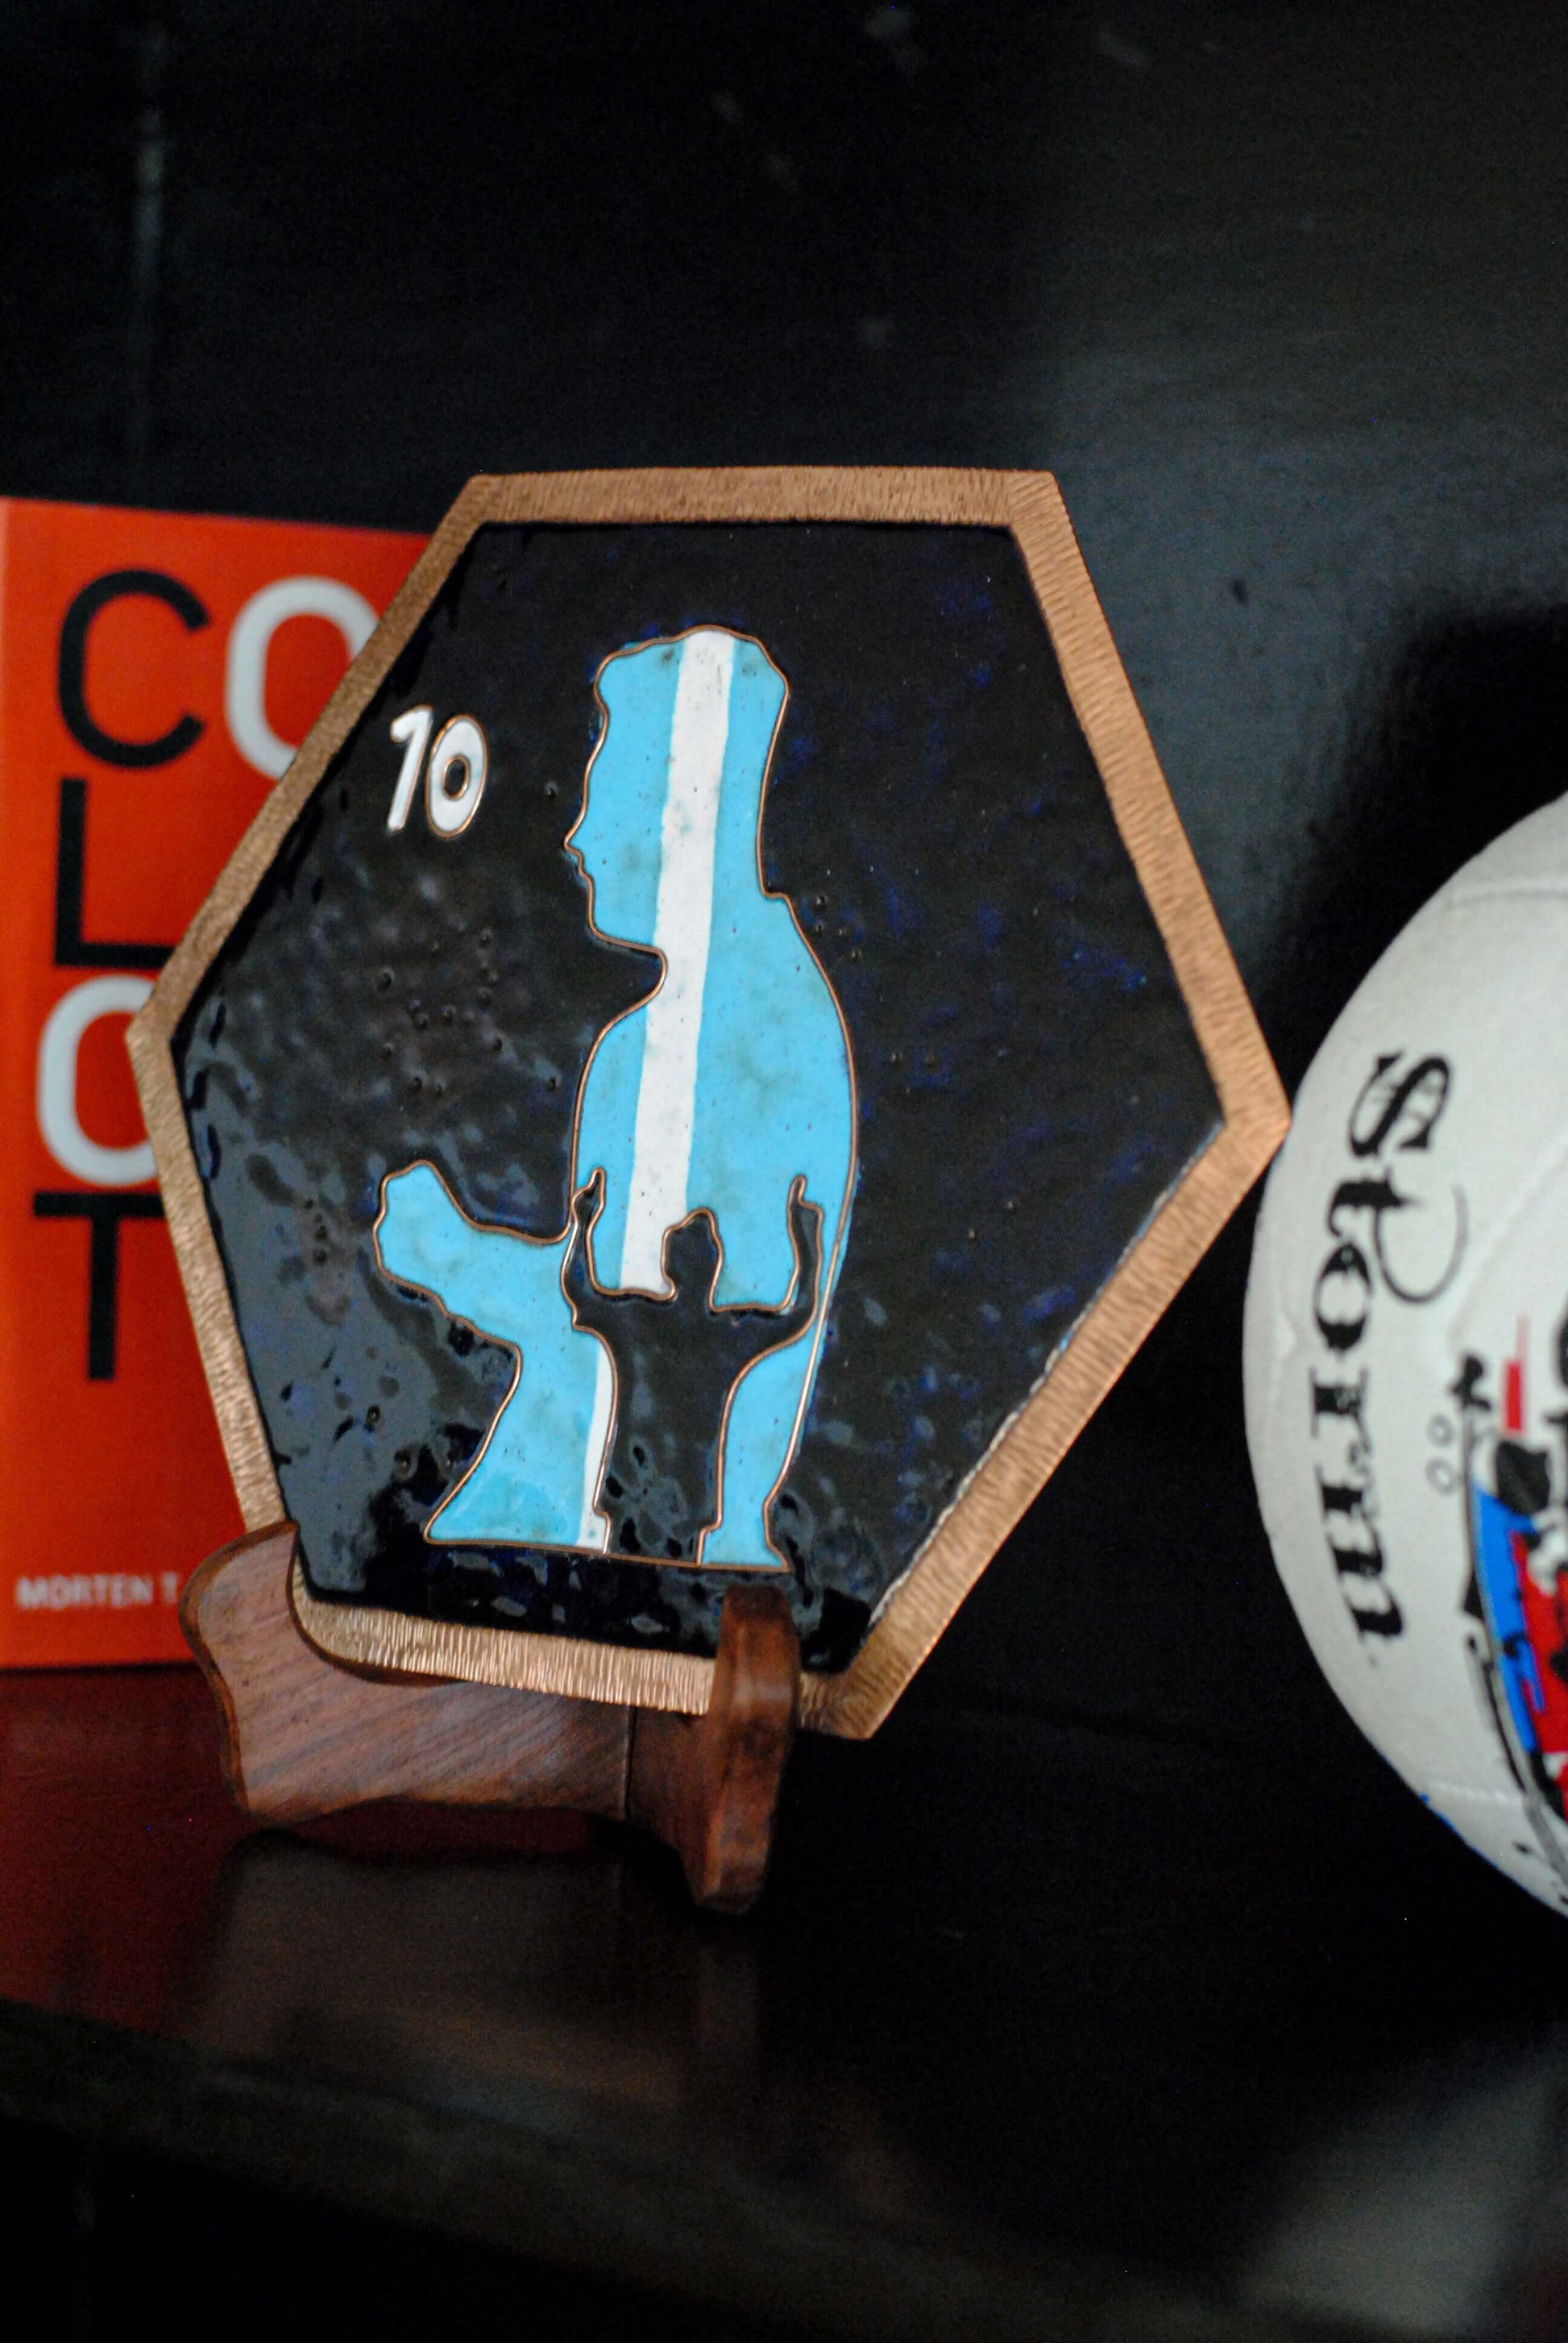 Copper enameled wallplates to celebrate FIFA legacies, Messi. With The Plated Project